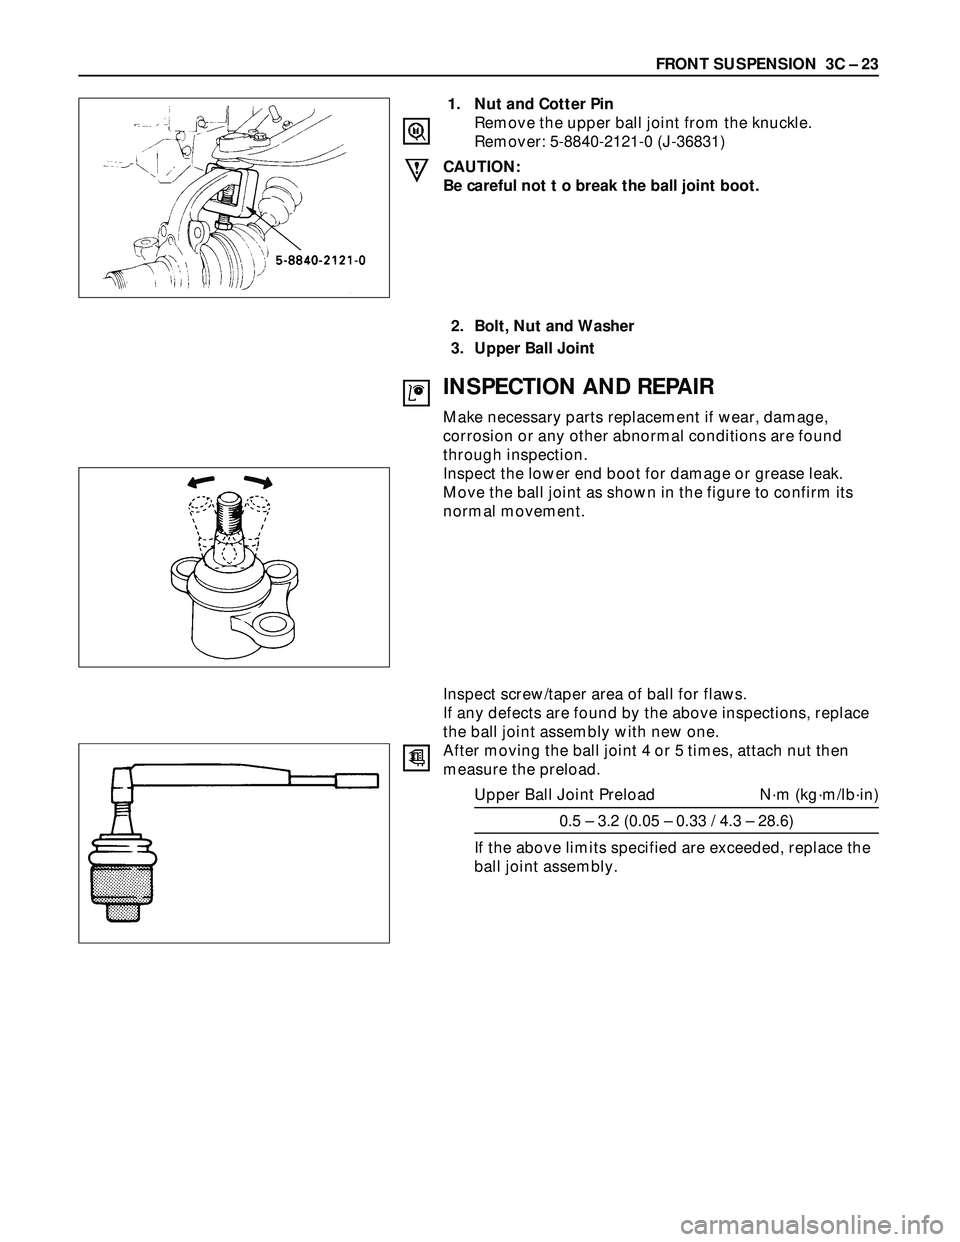 ISUZU TROOPER 1998  Service User Guide FRONT SUSPENSION  3C – 23
1. Nut and Cotter Pin
Remove the upper ball joint from the knuckle.
Remover: 5-8840-2121-0 (J-36831)
CAUTION:
Be careful not t o break the ball joint boot.
2. Bolt, Nut and